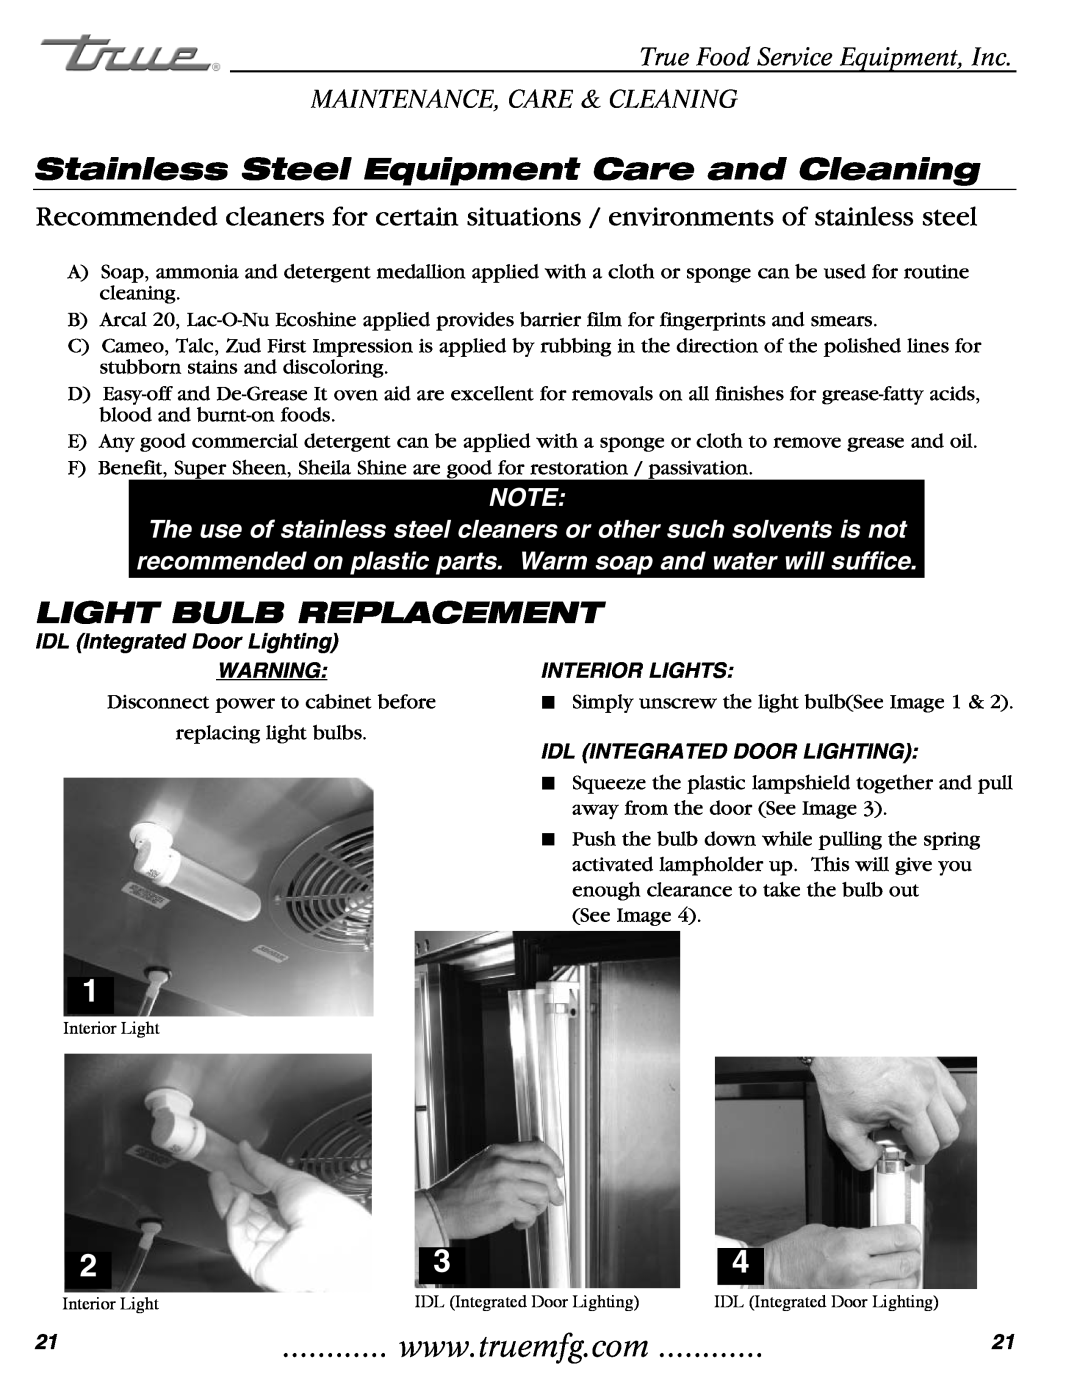 True Manufacturing Company T-35 Light Bulb Replacement, Stainless Steel Equipment Care and Cleaning, Interior Lights 